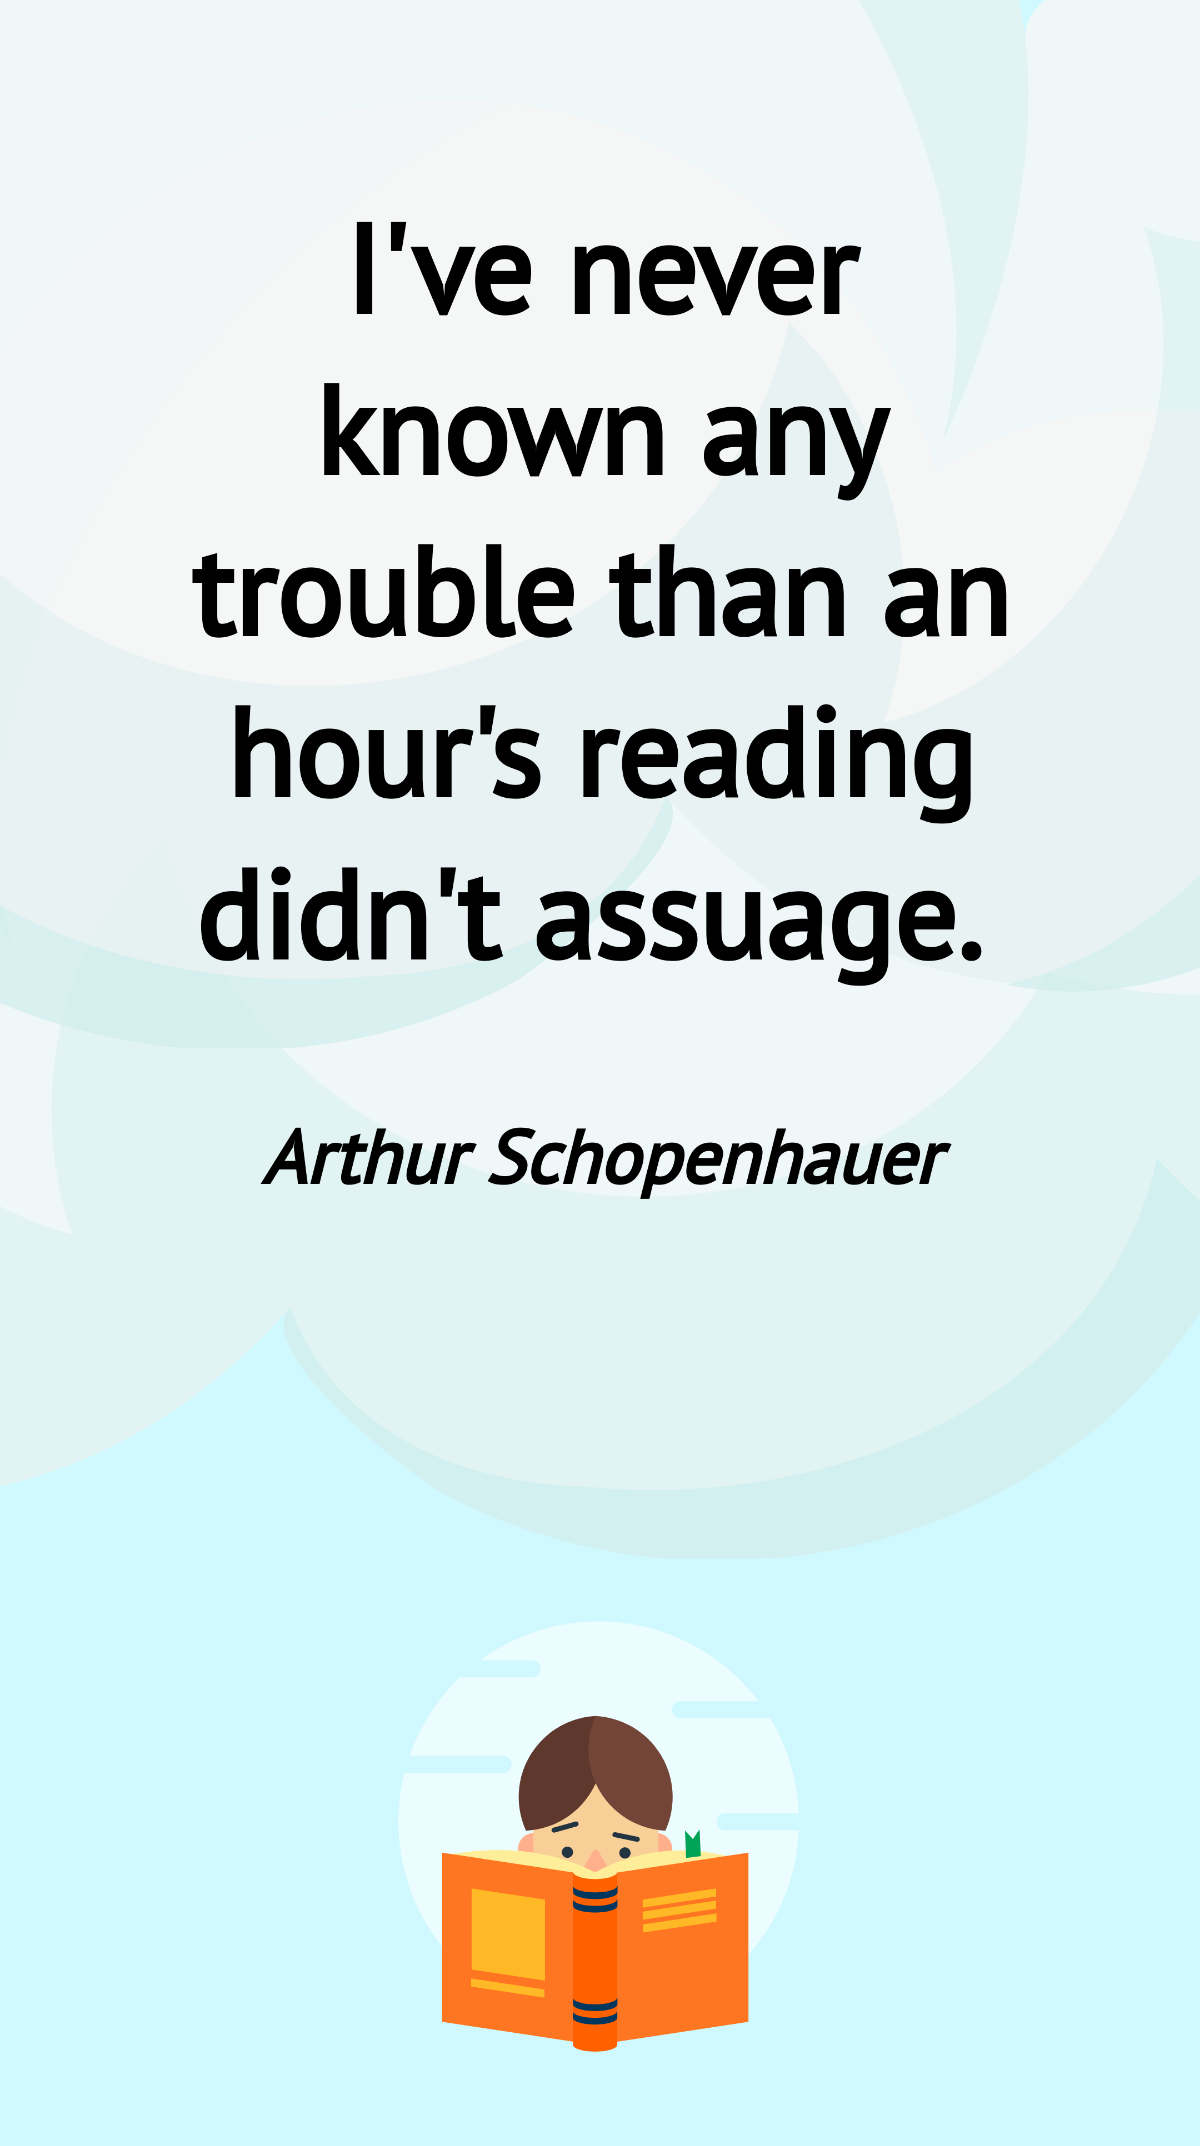 Arthur Schopenhauer - I've never known any trouble than an hour's reading didn't assuage. Template